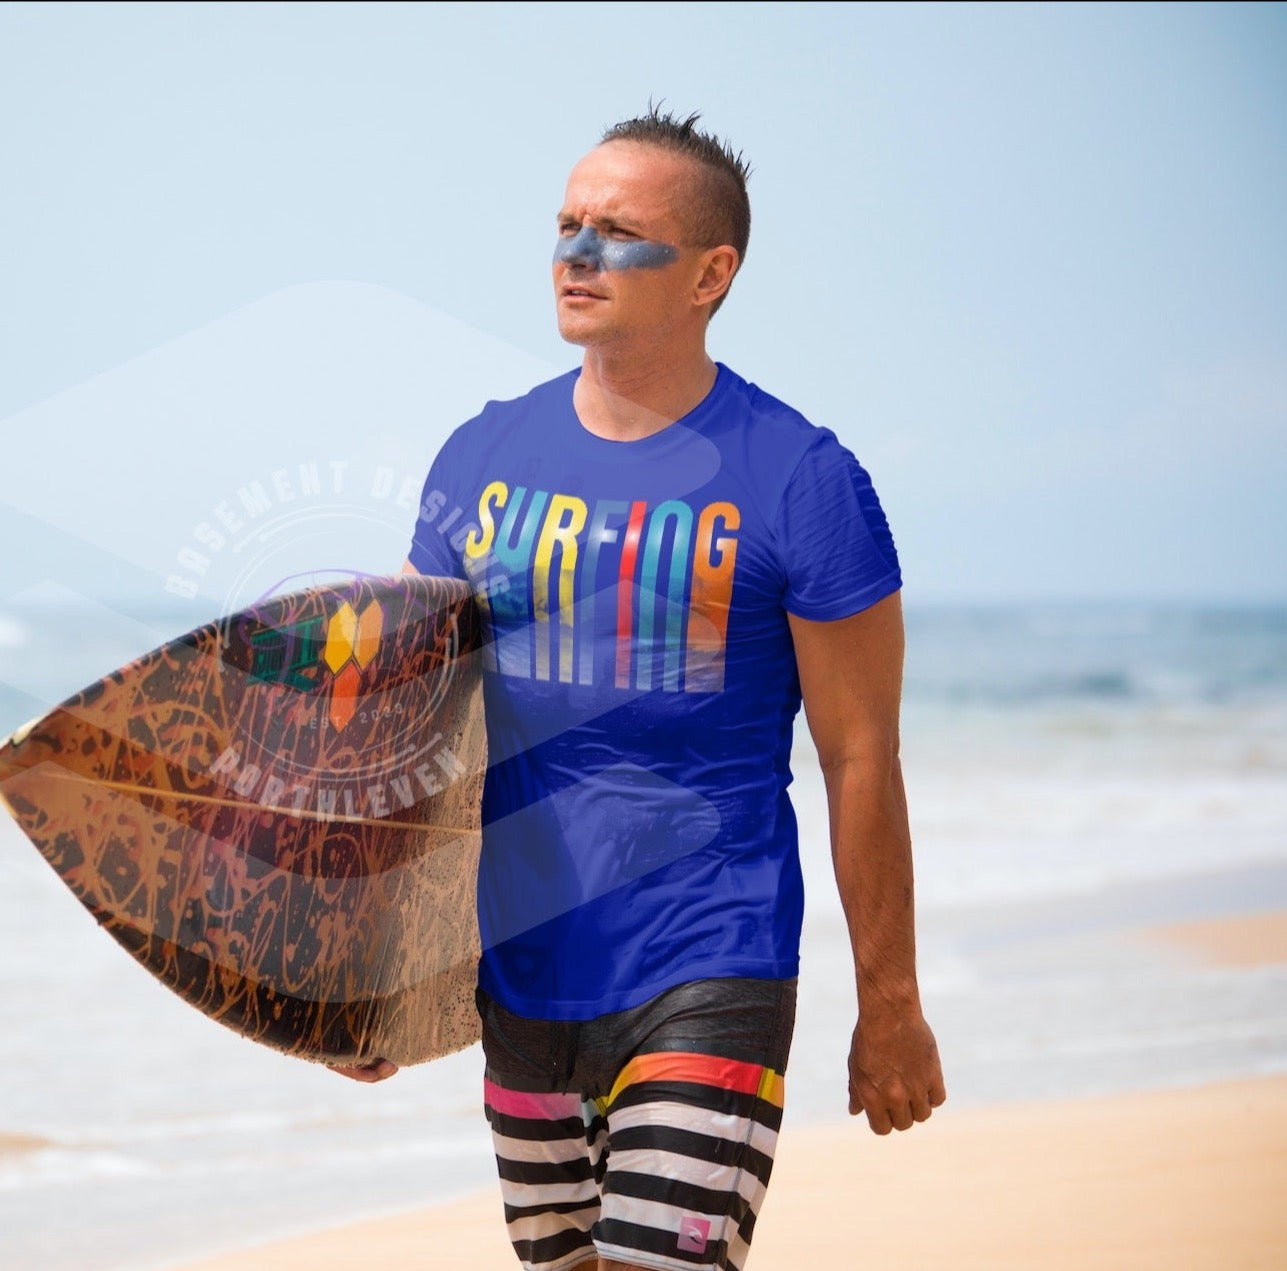 Vibrant Striped Surfing T-Shirt with Wave Design - Catch the Wave in Style